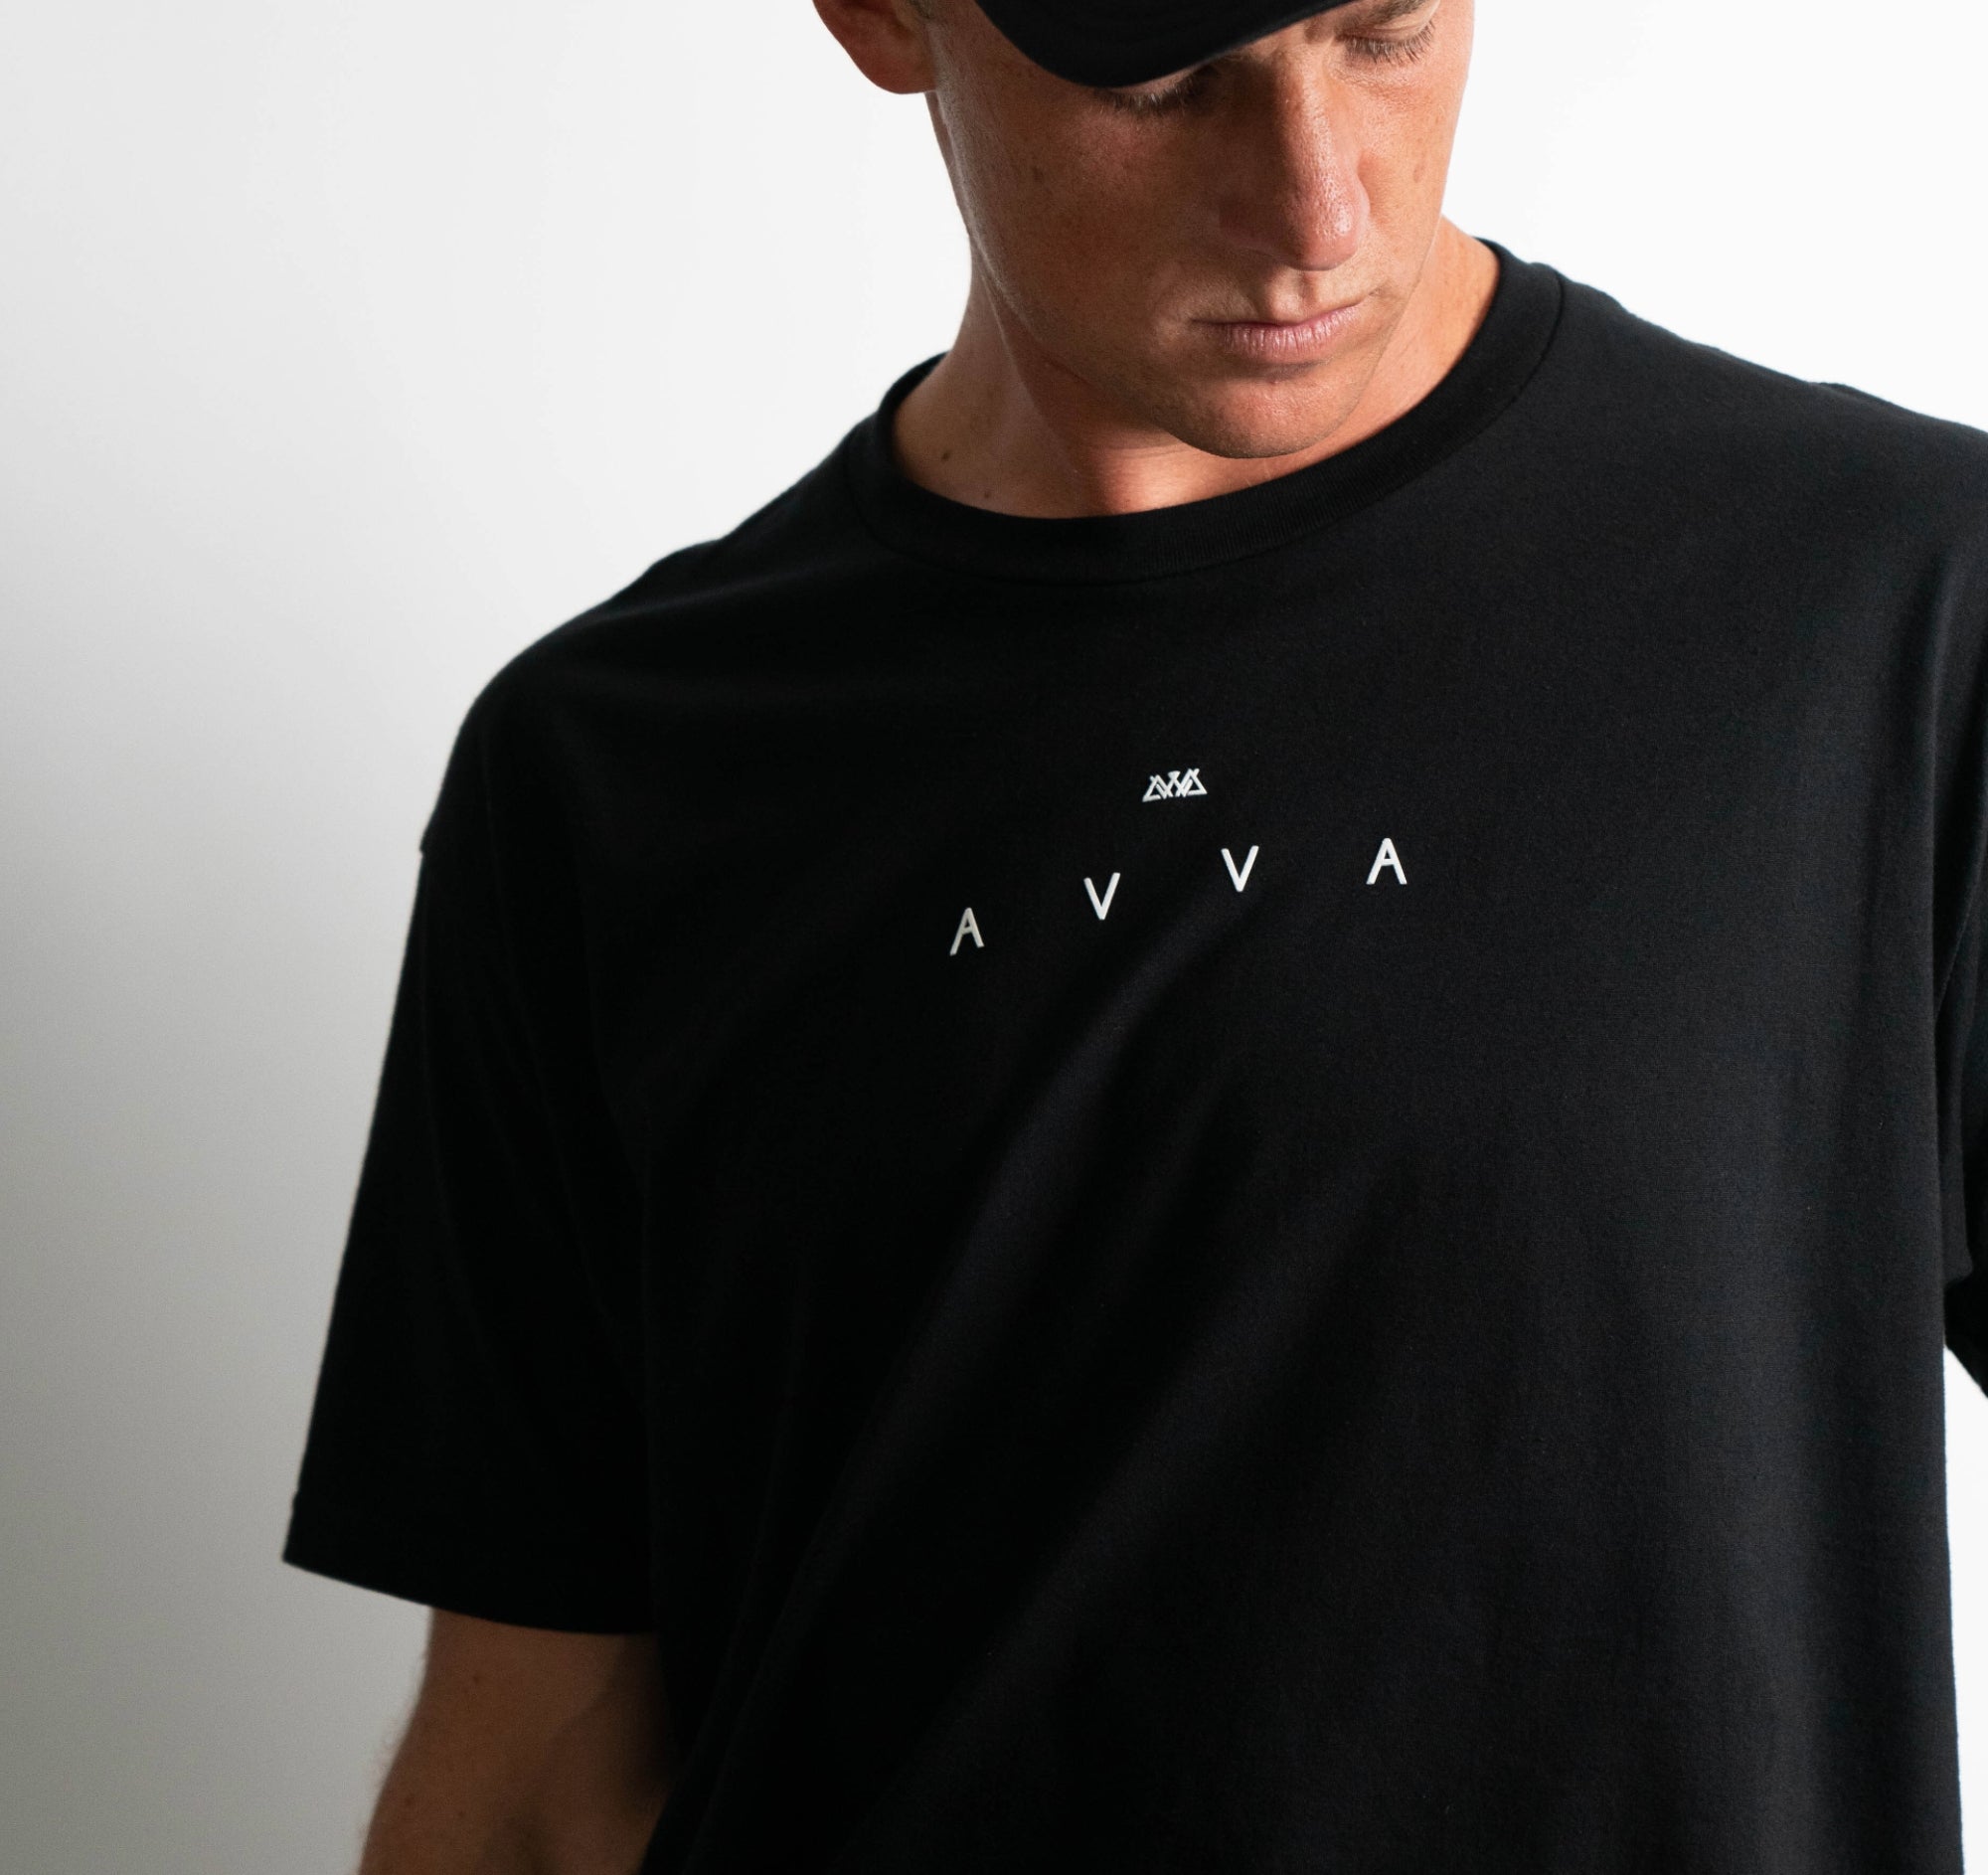 FRONT VIEW OF ELEMENTS TEE. MODEL WEARING IT LOOKING TO THE LEFT. HIGHLIGHTS THE SIMPLE AVVA LOGO ON FRONT CENTER MIDDLE CHEST OF THE TEE.